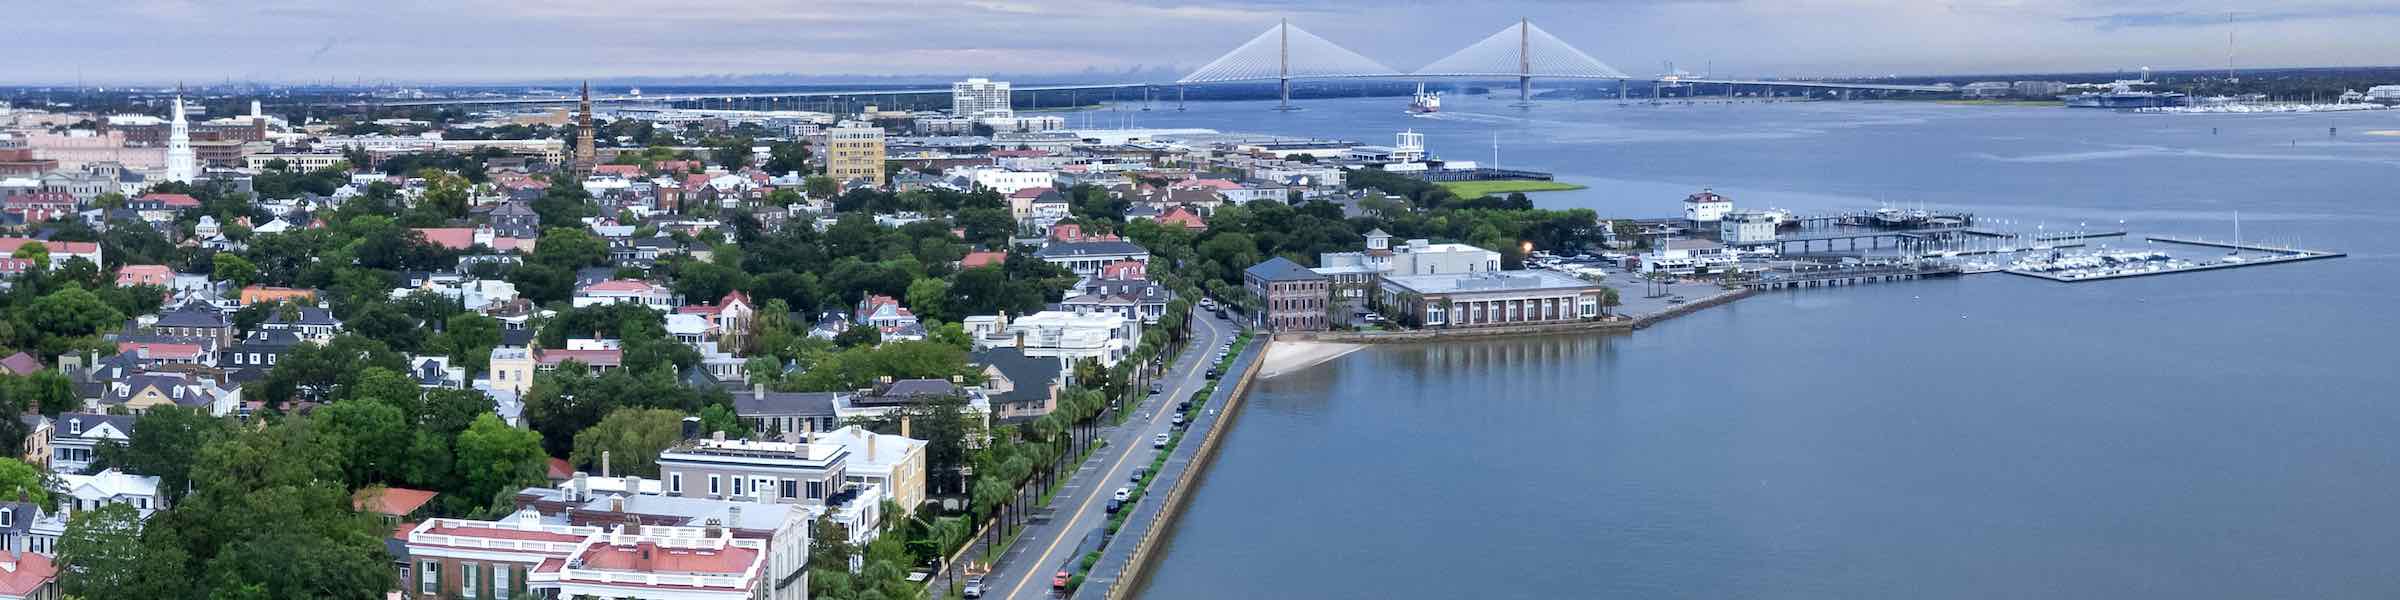 Aerial view of East Battery and the Charleston Harbor.